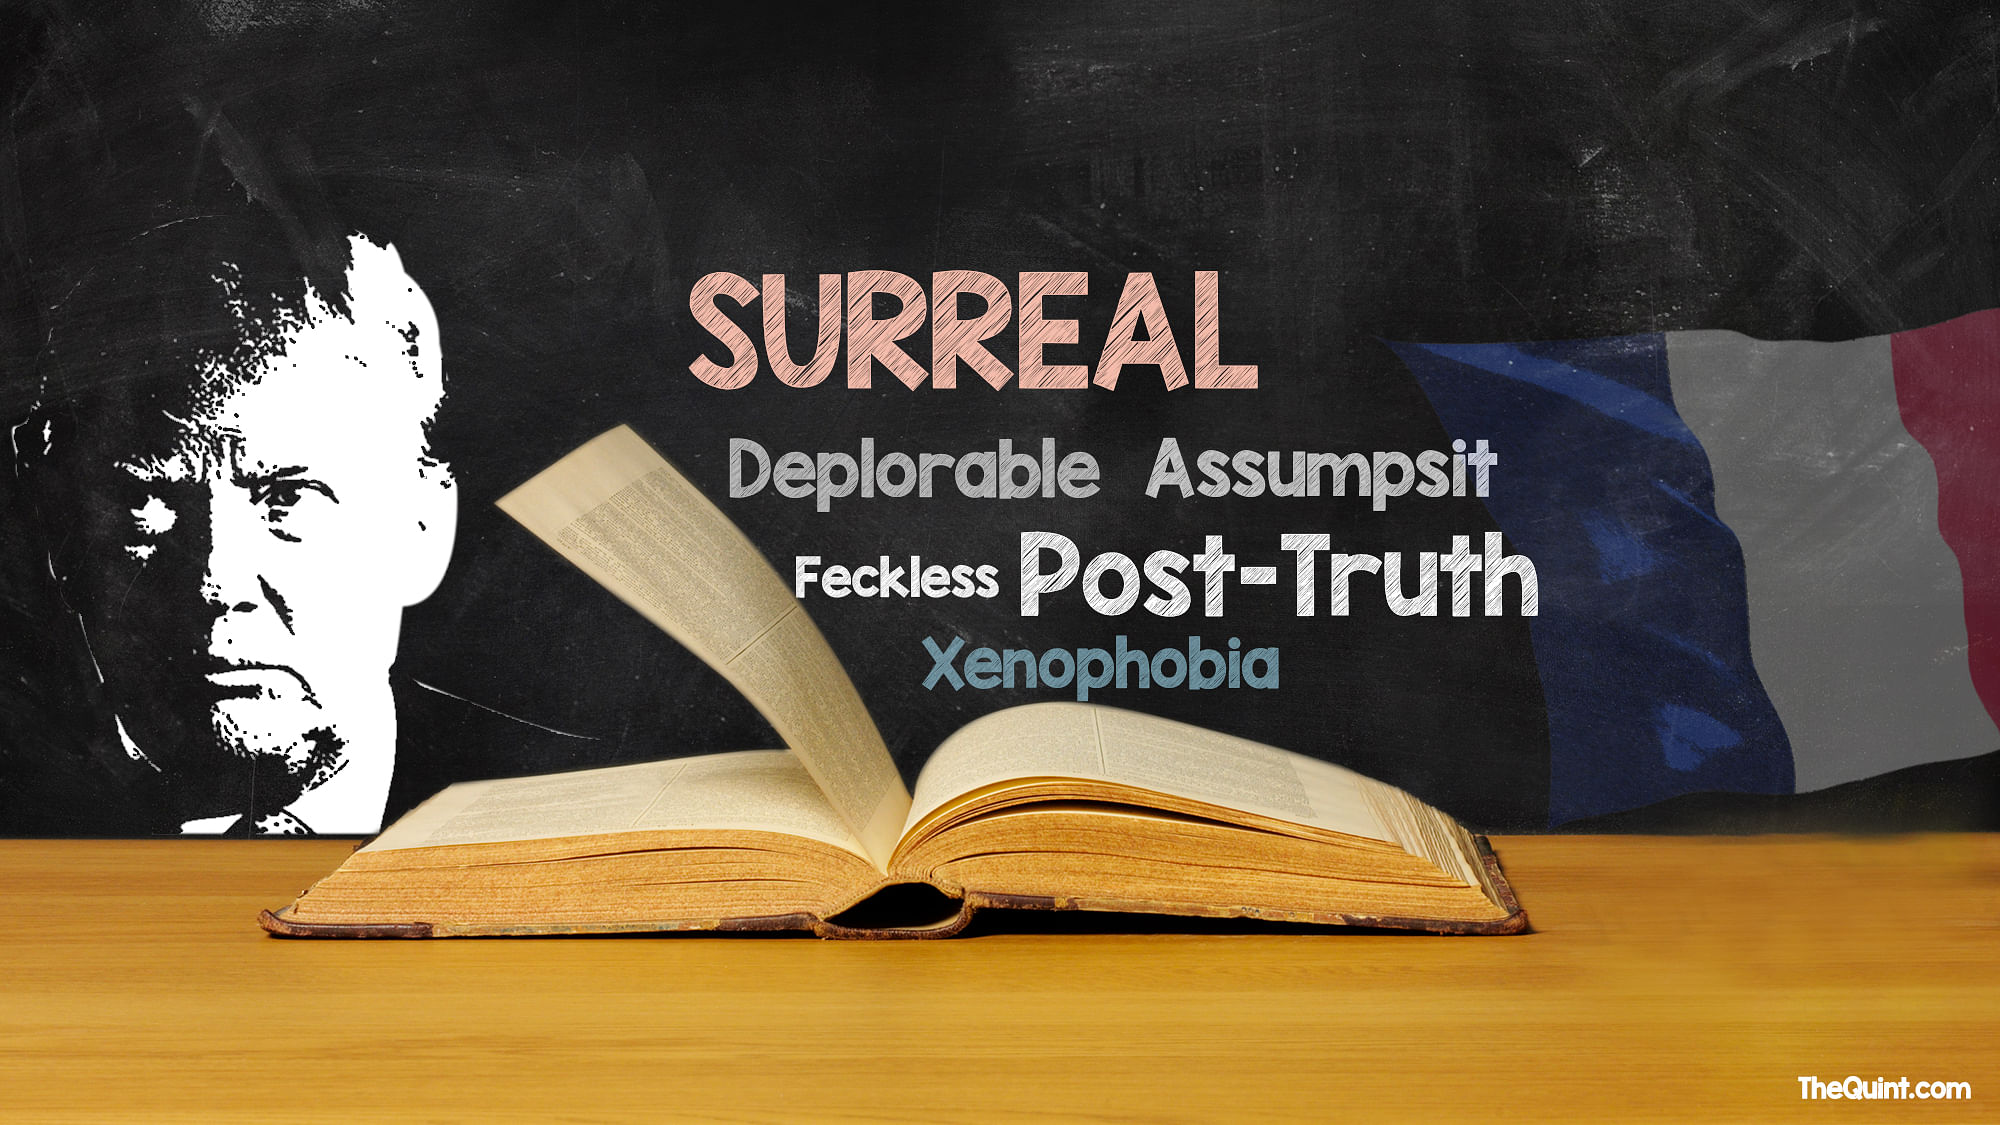 “Surreal” has joined Oxford’s “post-truth” and Dictionary.com’s “xenophobia” as the year’s top choices. (Photo: Rhythum Seth/<b>The Quint</b>)